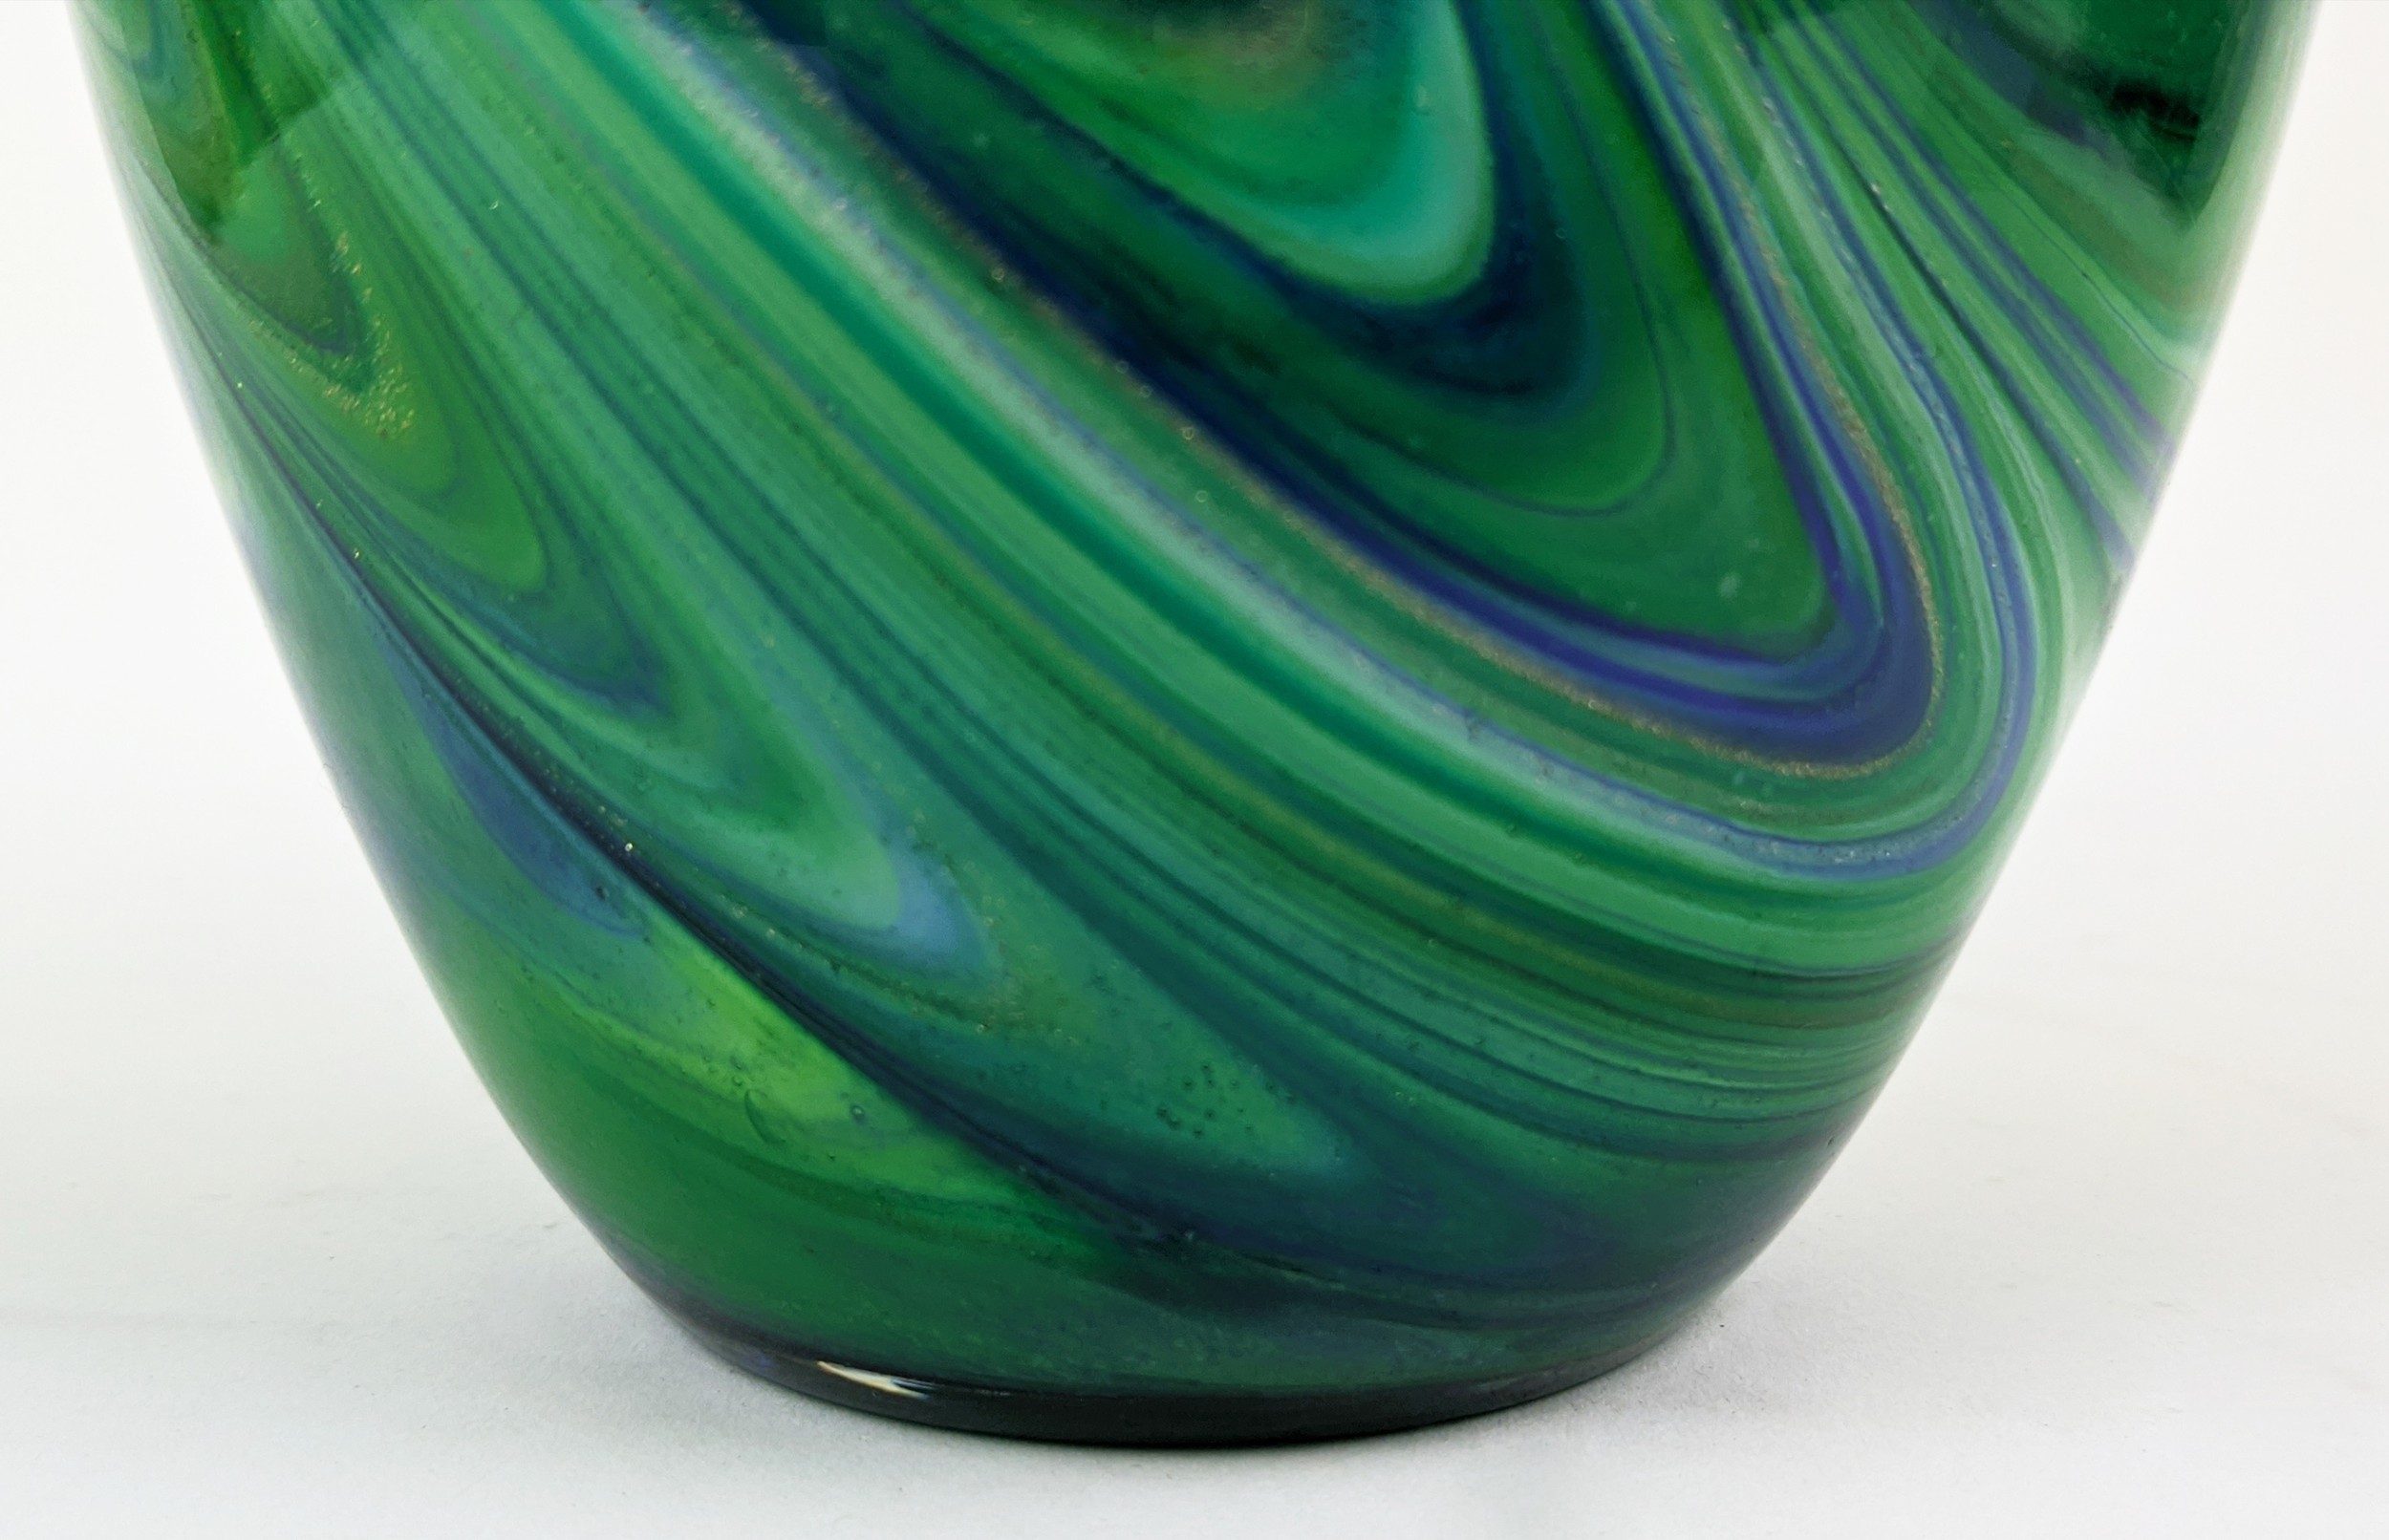 A MURANO GLASS VASE, of ovoid form, with a green, white and blue swirling pattern, gold flecks, 40cm - Image 3 of 7